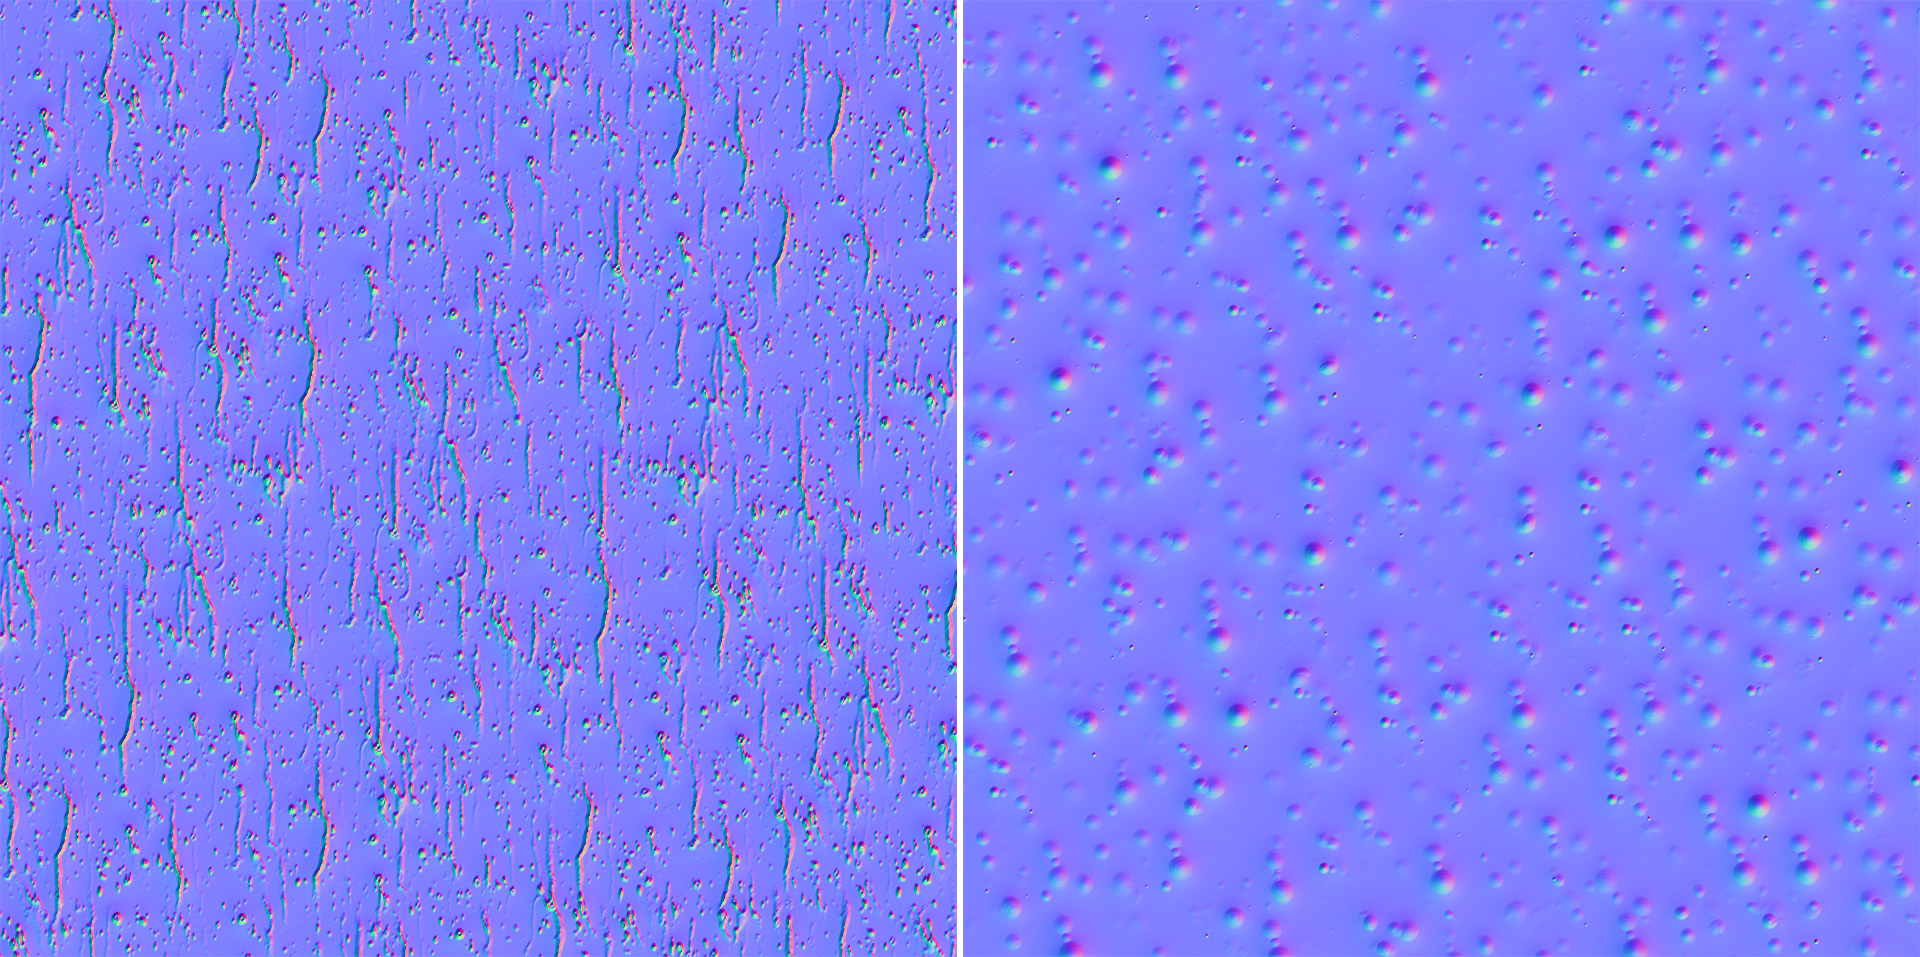 Figure 28: Crops from the 8K wet map normals generated using Photoshop's "Generate Normal Map" filter tool.